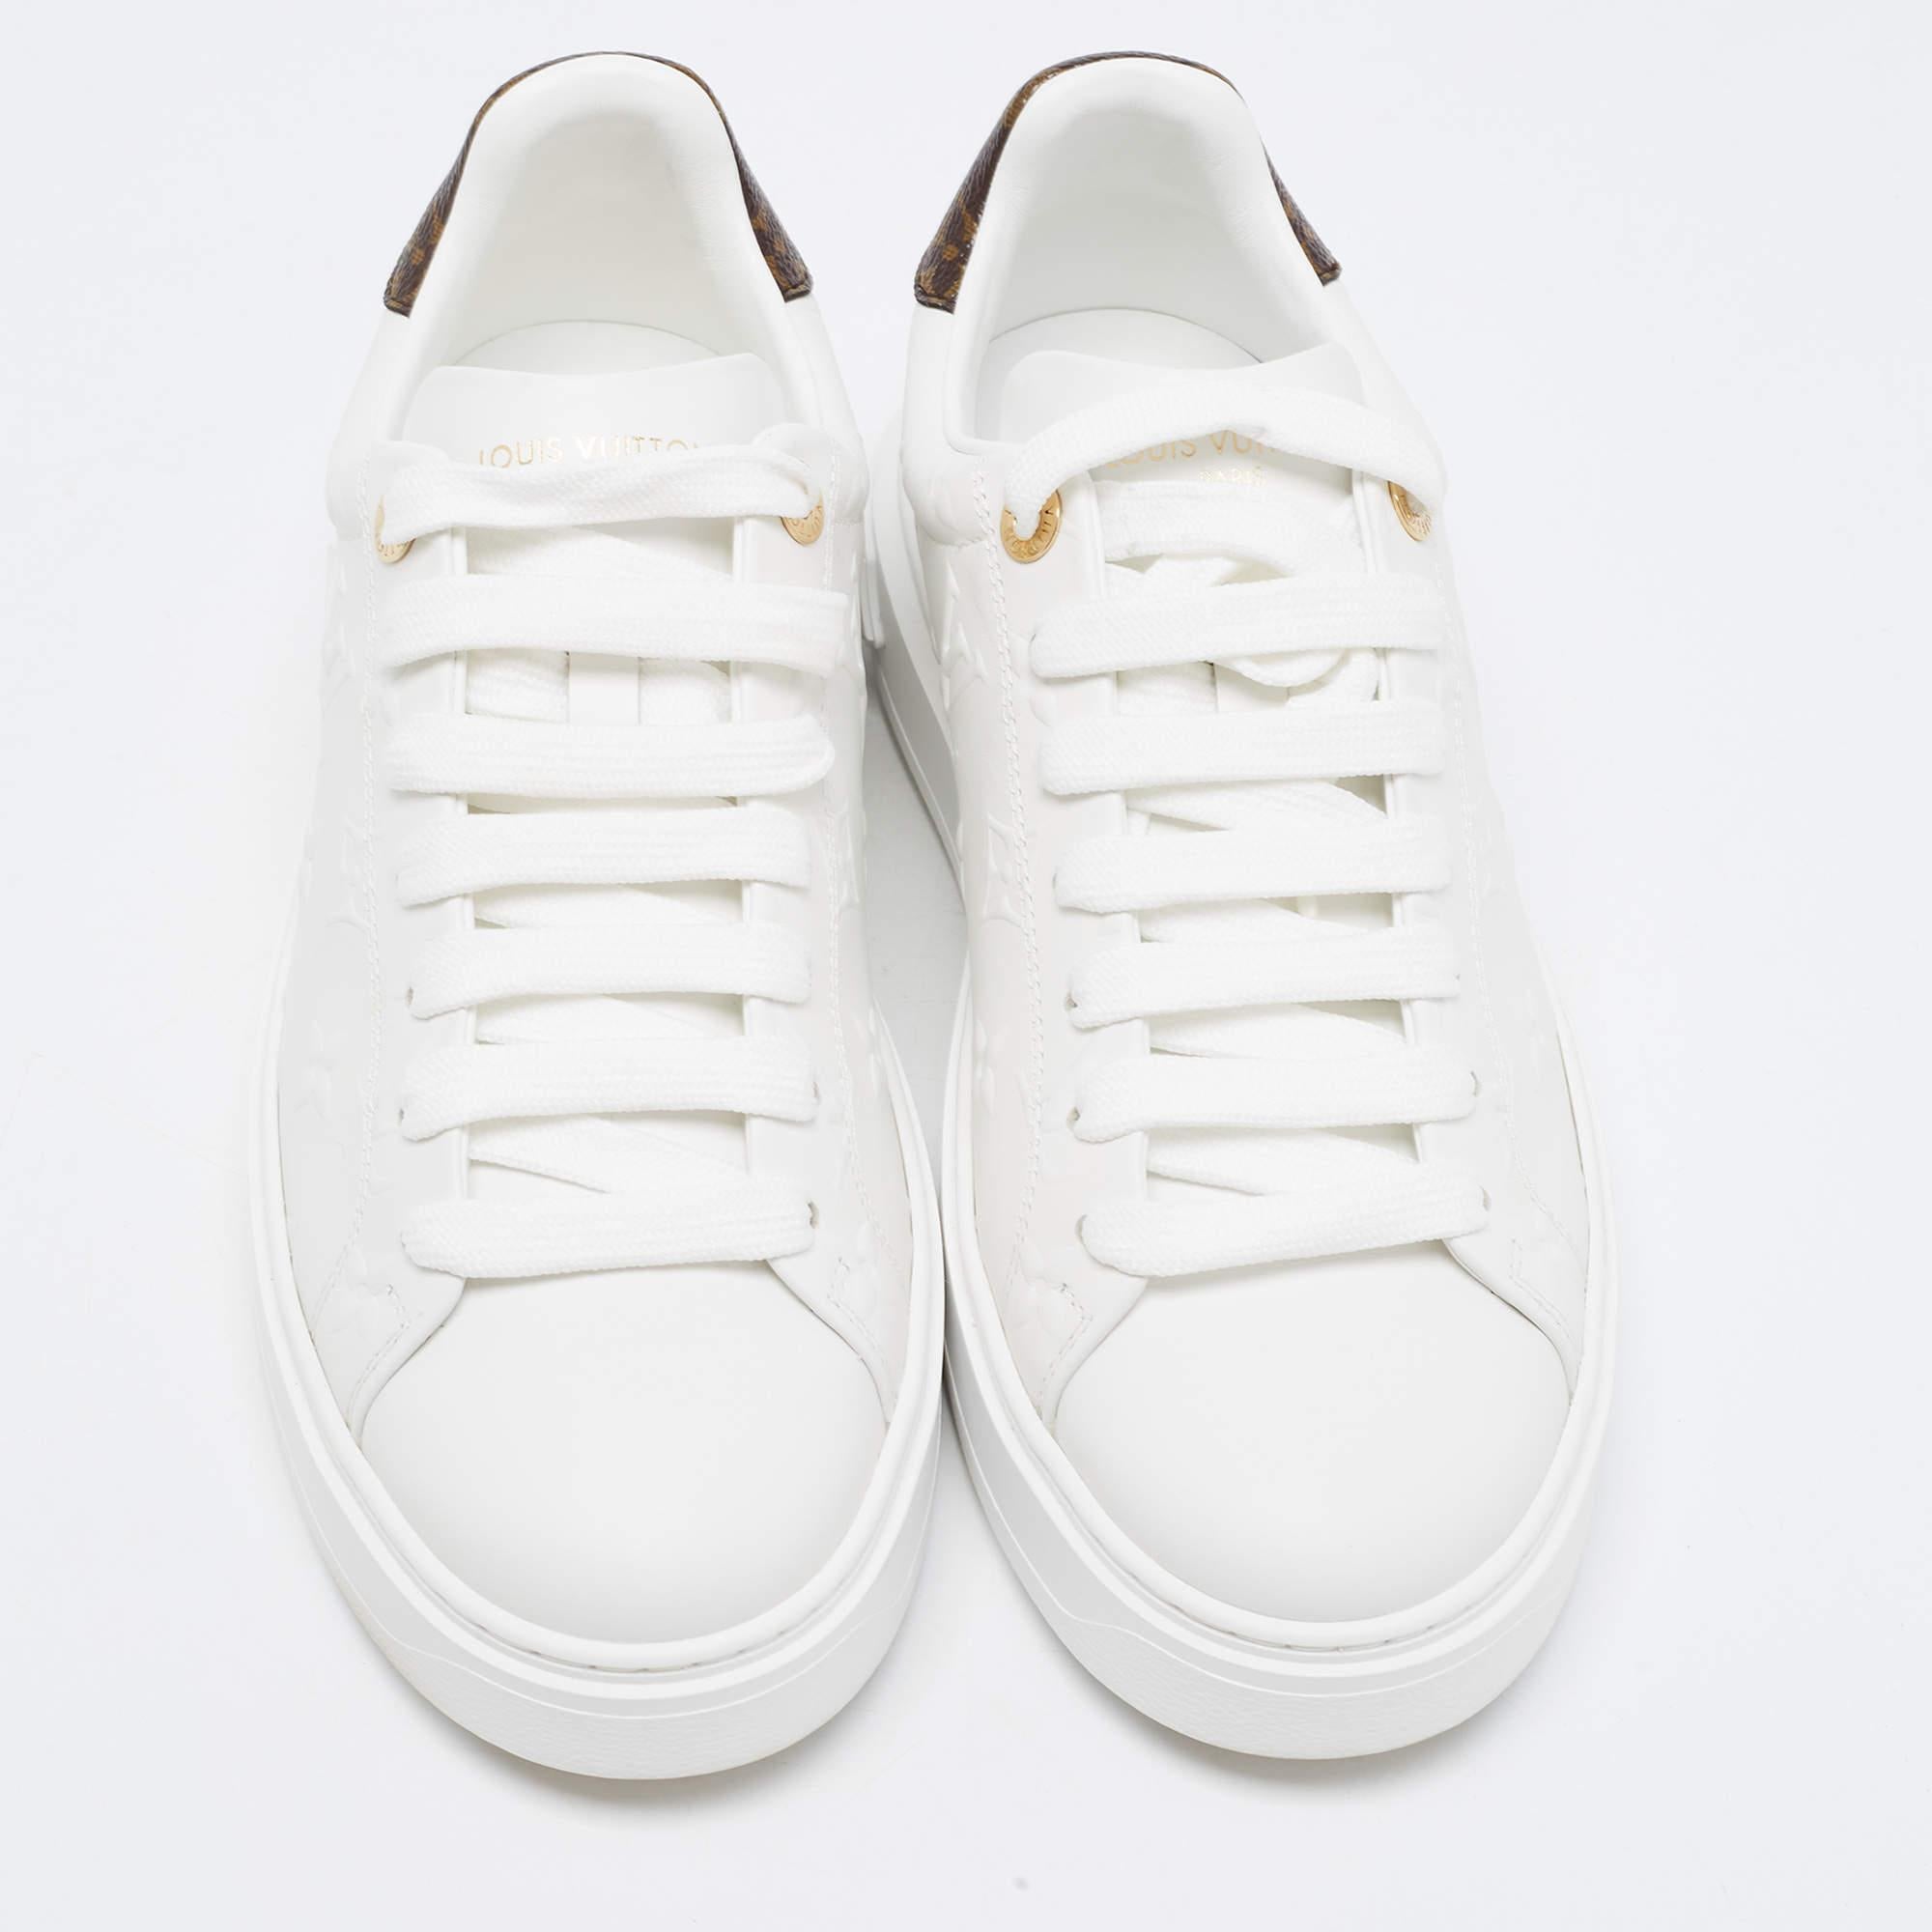 Coming in a classic silhouette, these designer sneakers are a seamless combination of luxury, comfort, and style. These LV sneakers are designed with signature details and comfortable insoles.

Includes
Original Dustbag